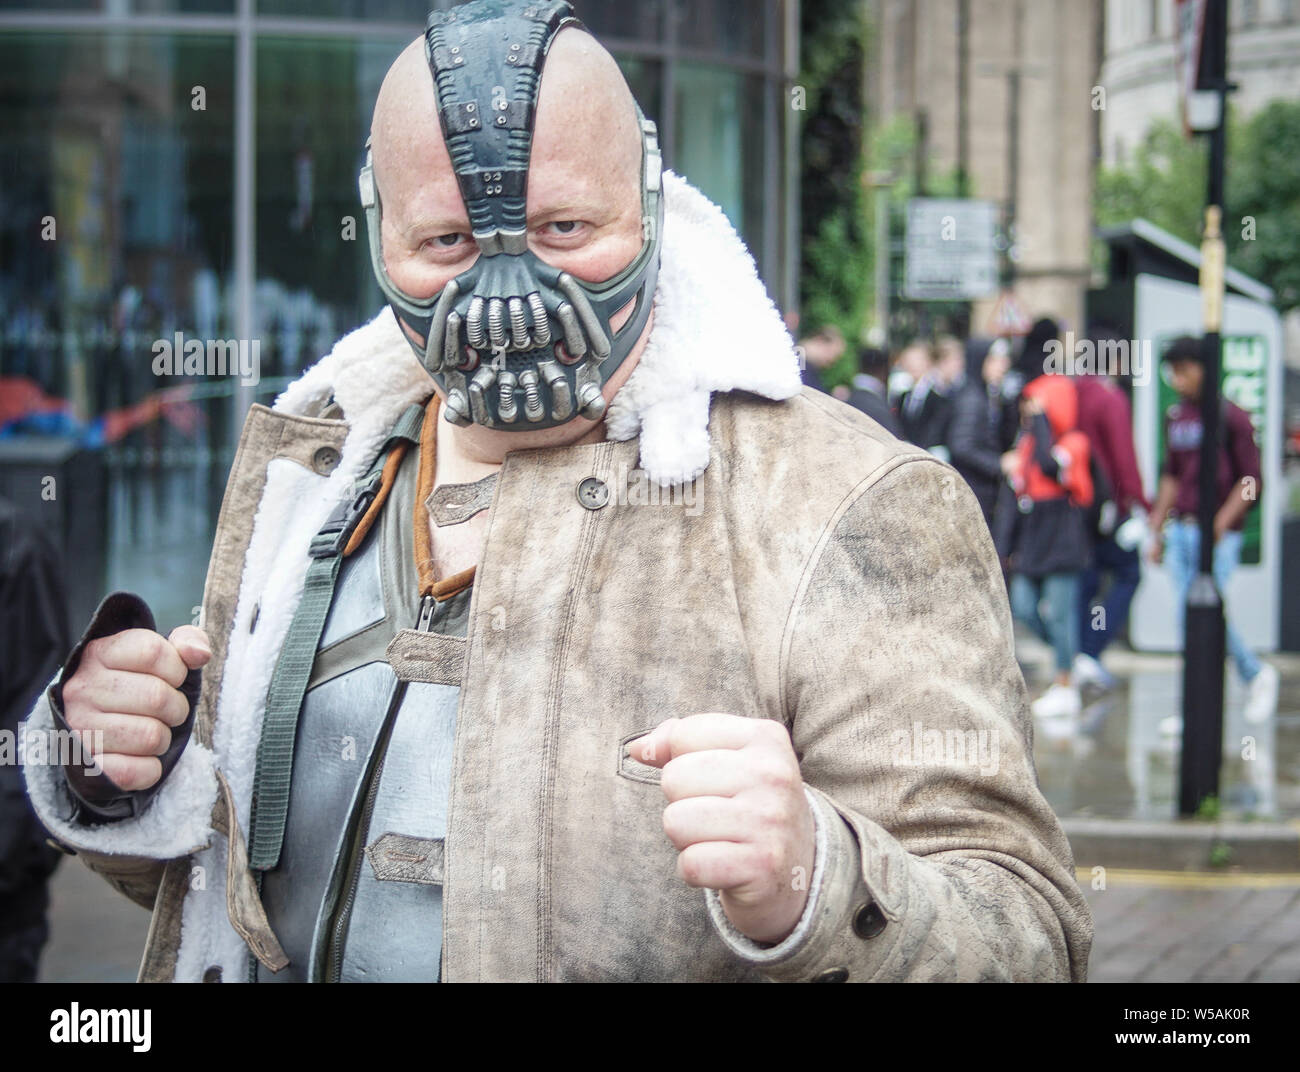 Manchester,  UK. 27th July 2019. A cosplayer  dressed as their favourite character  during Day 1 of Manchester  MCM Comic Con 2019 at Manchester Central. Credit : Ioannis Alexopoulos / Alamy Live News Stock Photo